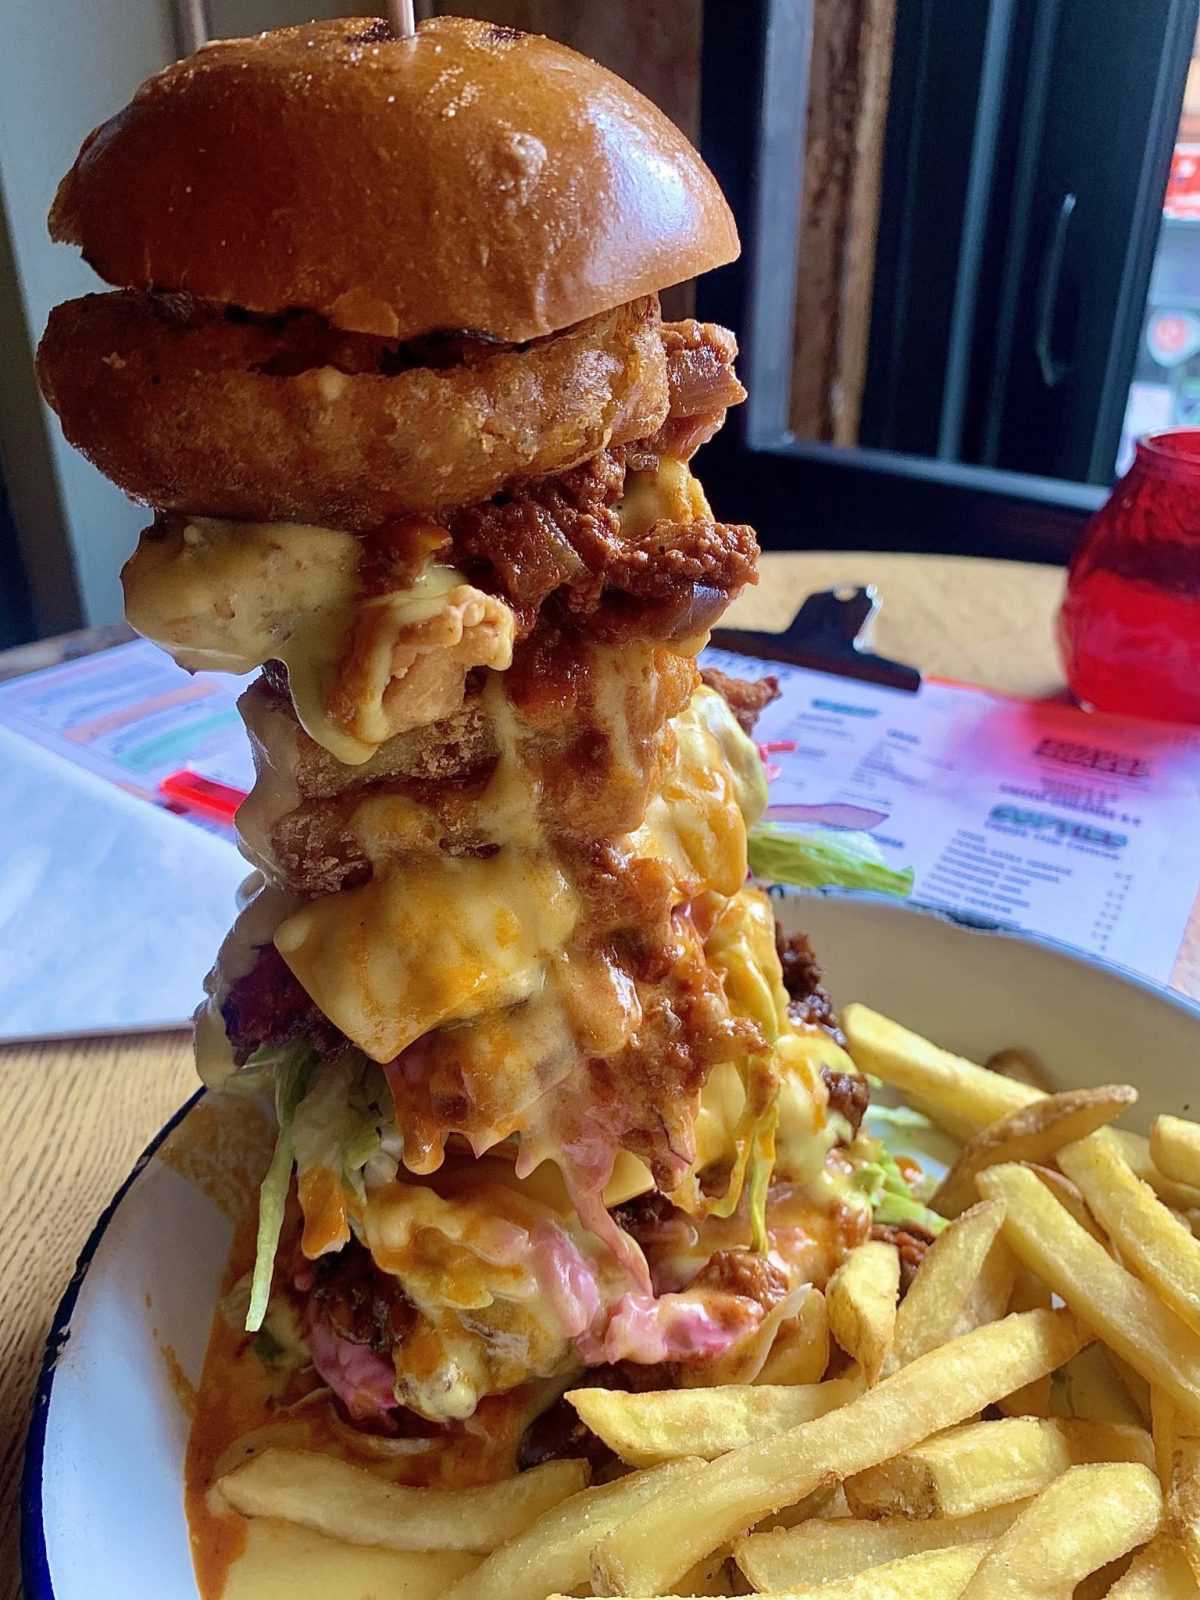 giant burger with fries.